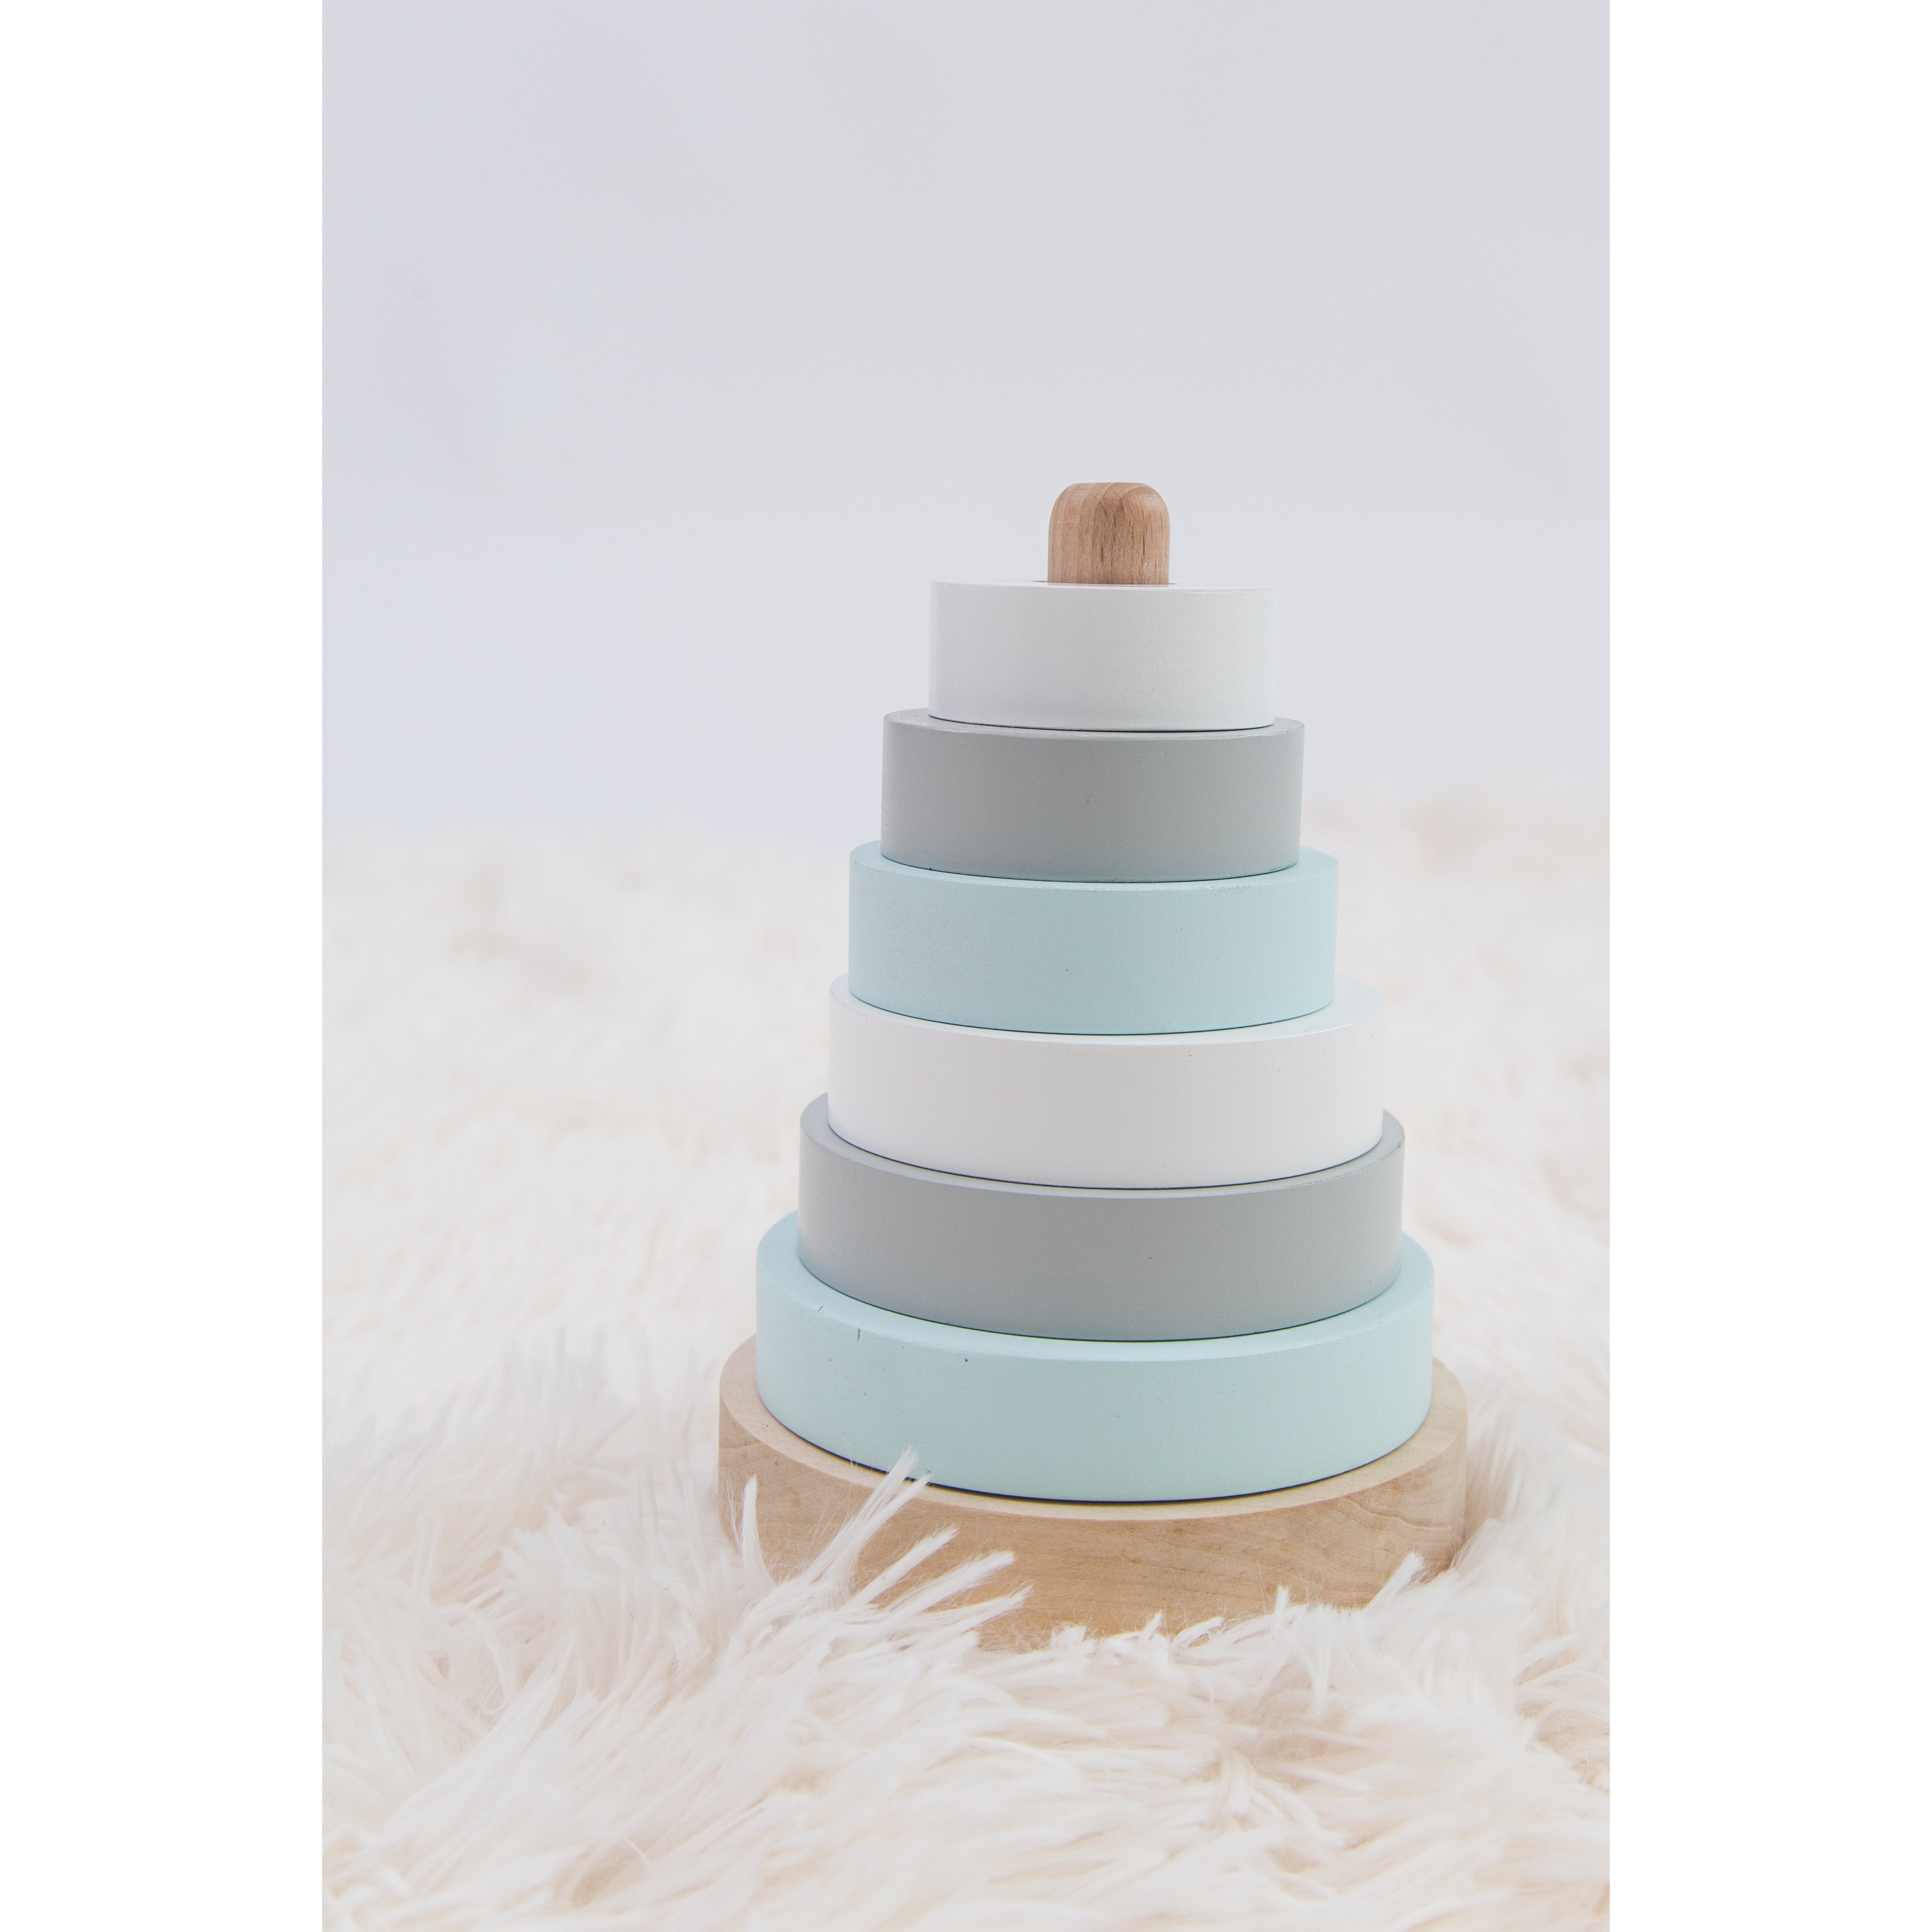 Blue Wooden Stacking Pyramid & Peg Board Sorter